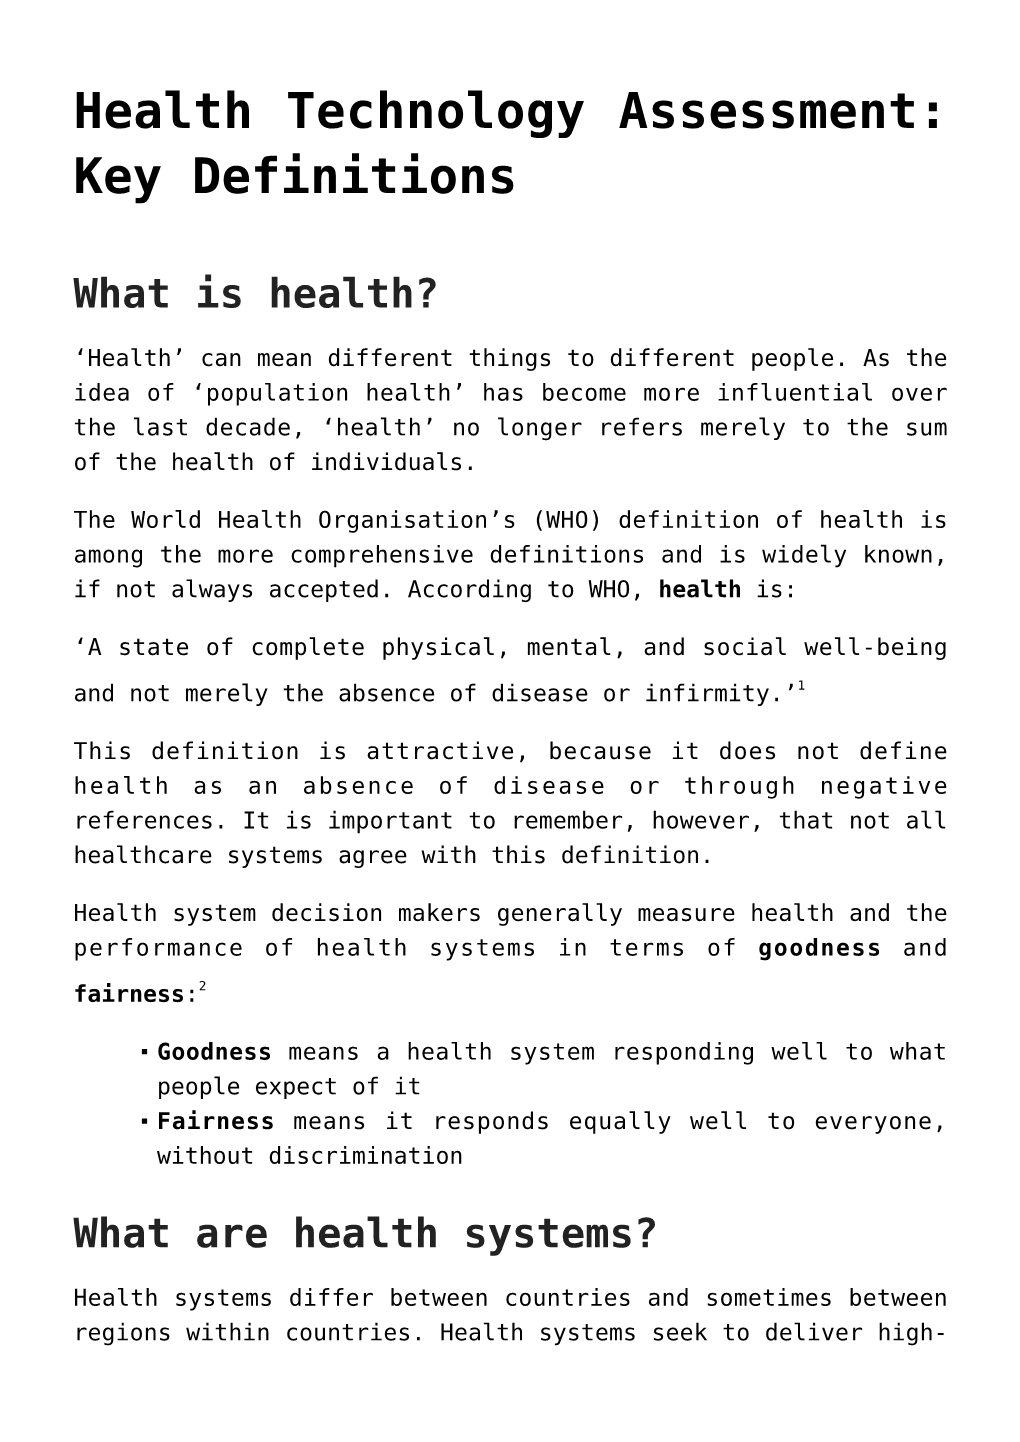 Health Technology Assessment: Key Definitions